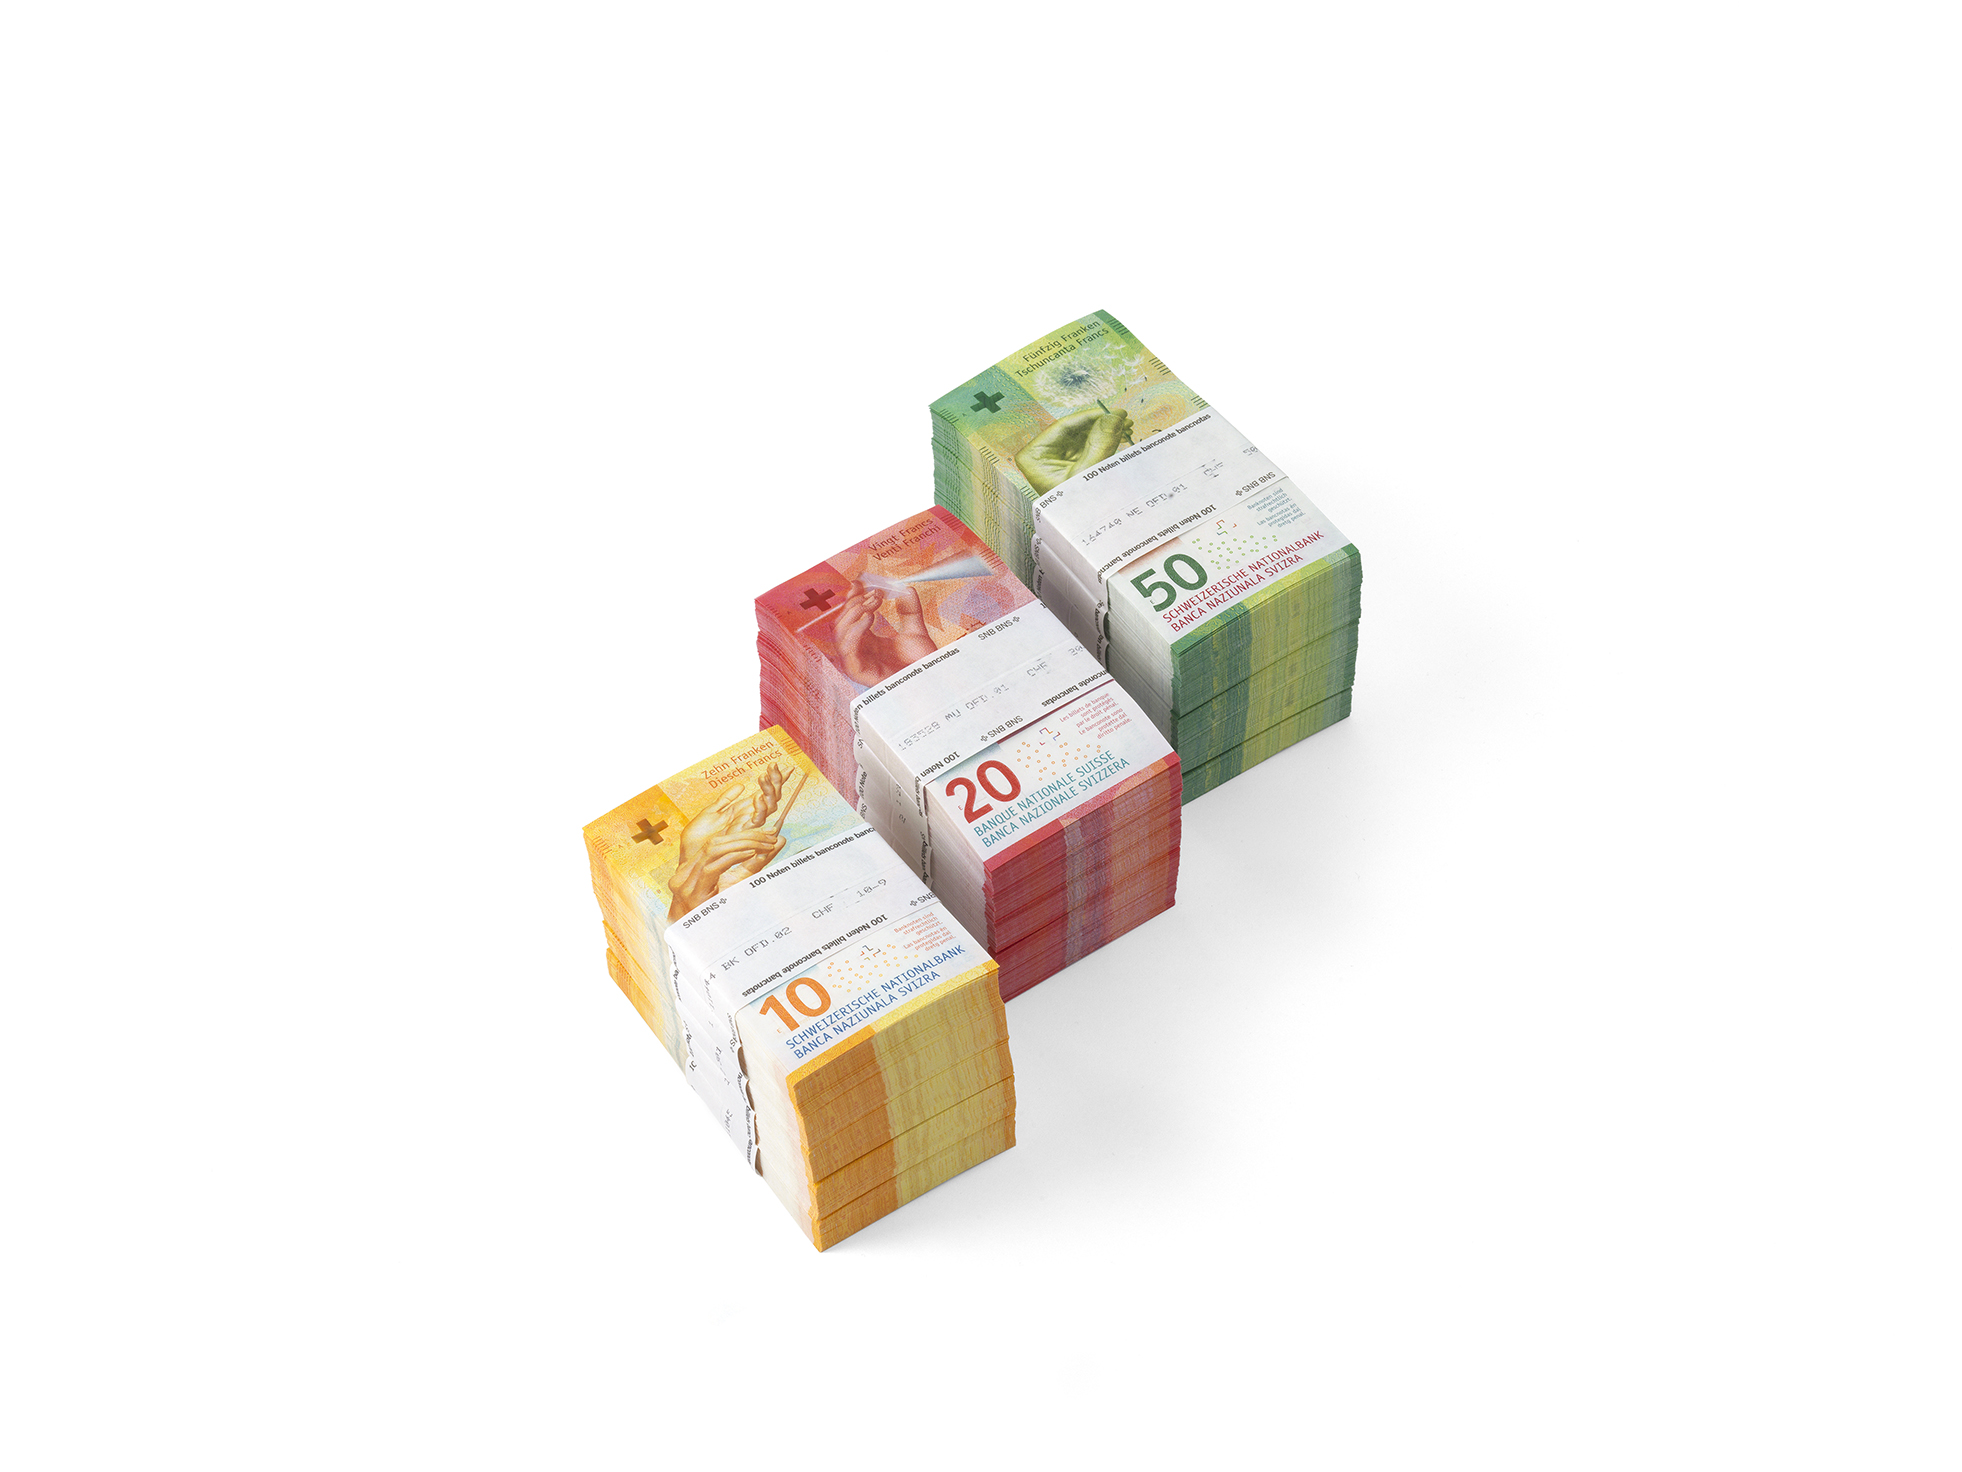 Bundles of 10, 20 and 50-franc notes